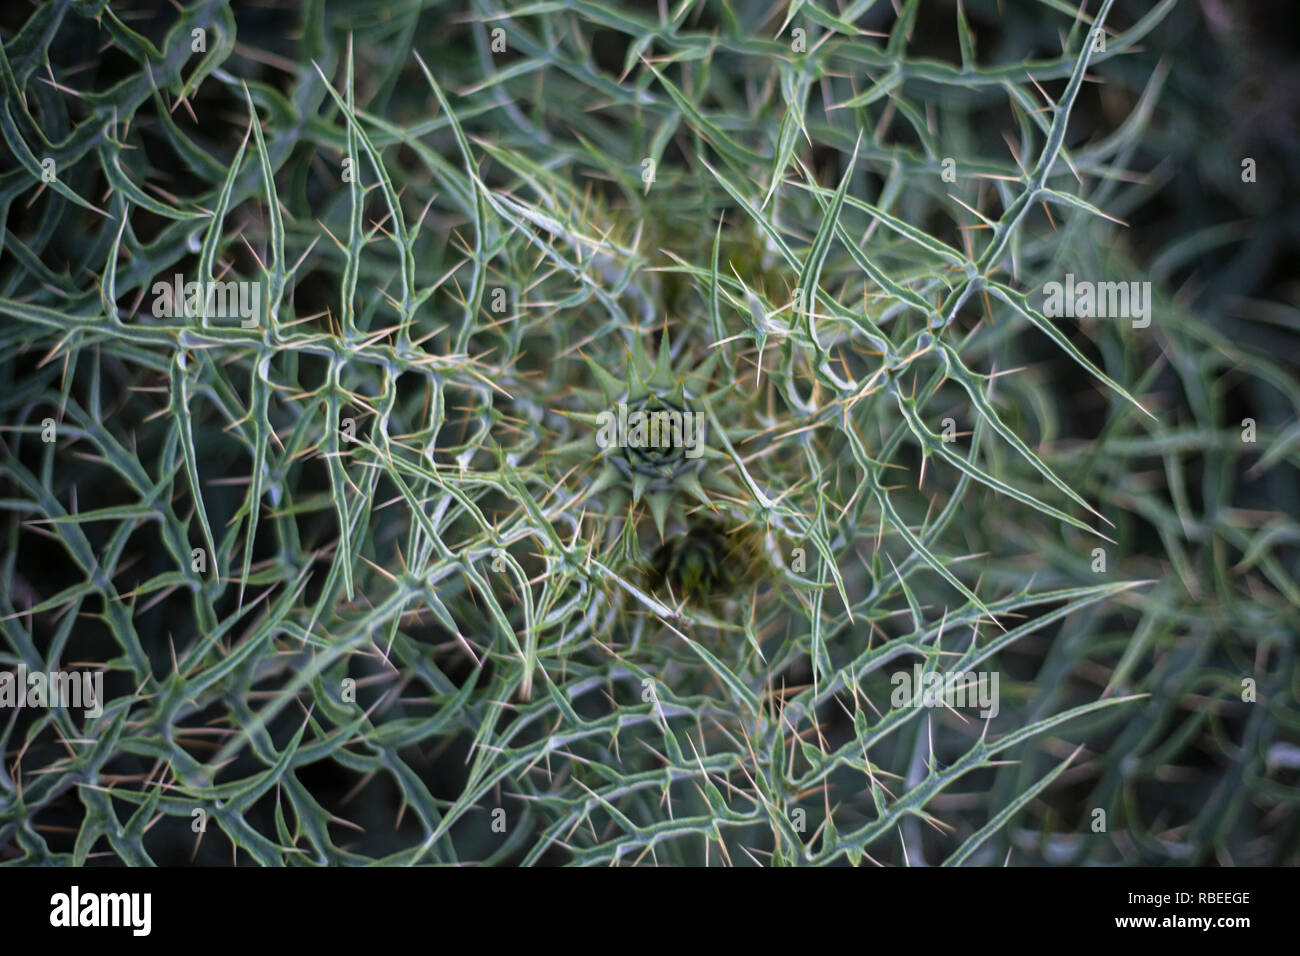 Thorny Spiky Plant Seamless. Prickly Bush Close up Shot in Green White Color. Cactus Spreading its Thistles. Detailed Sharp and Pointed Stems and Leav Stock Photo